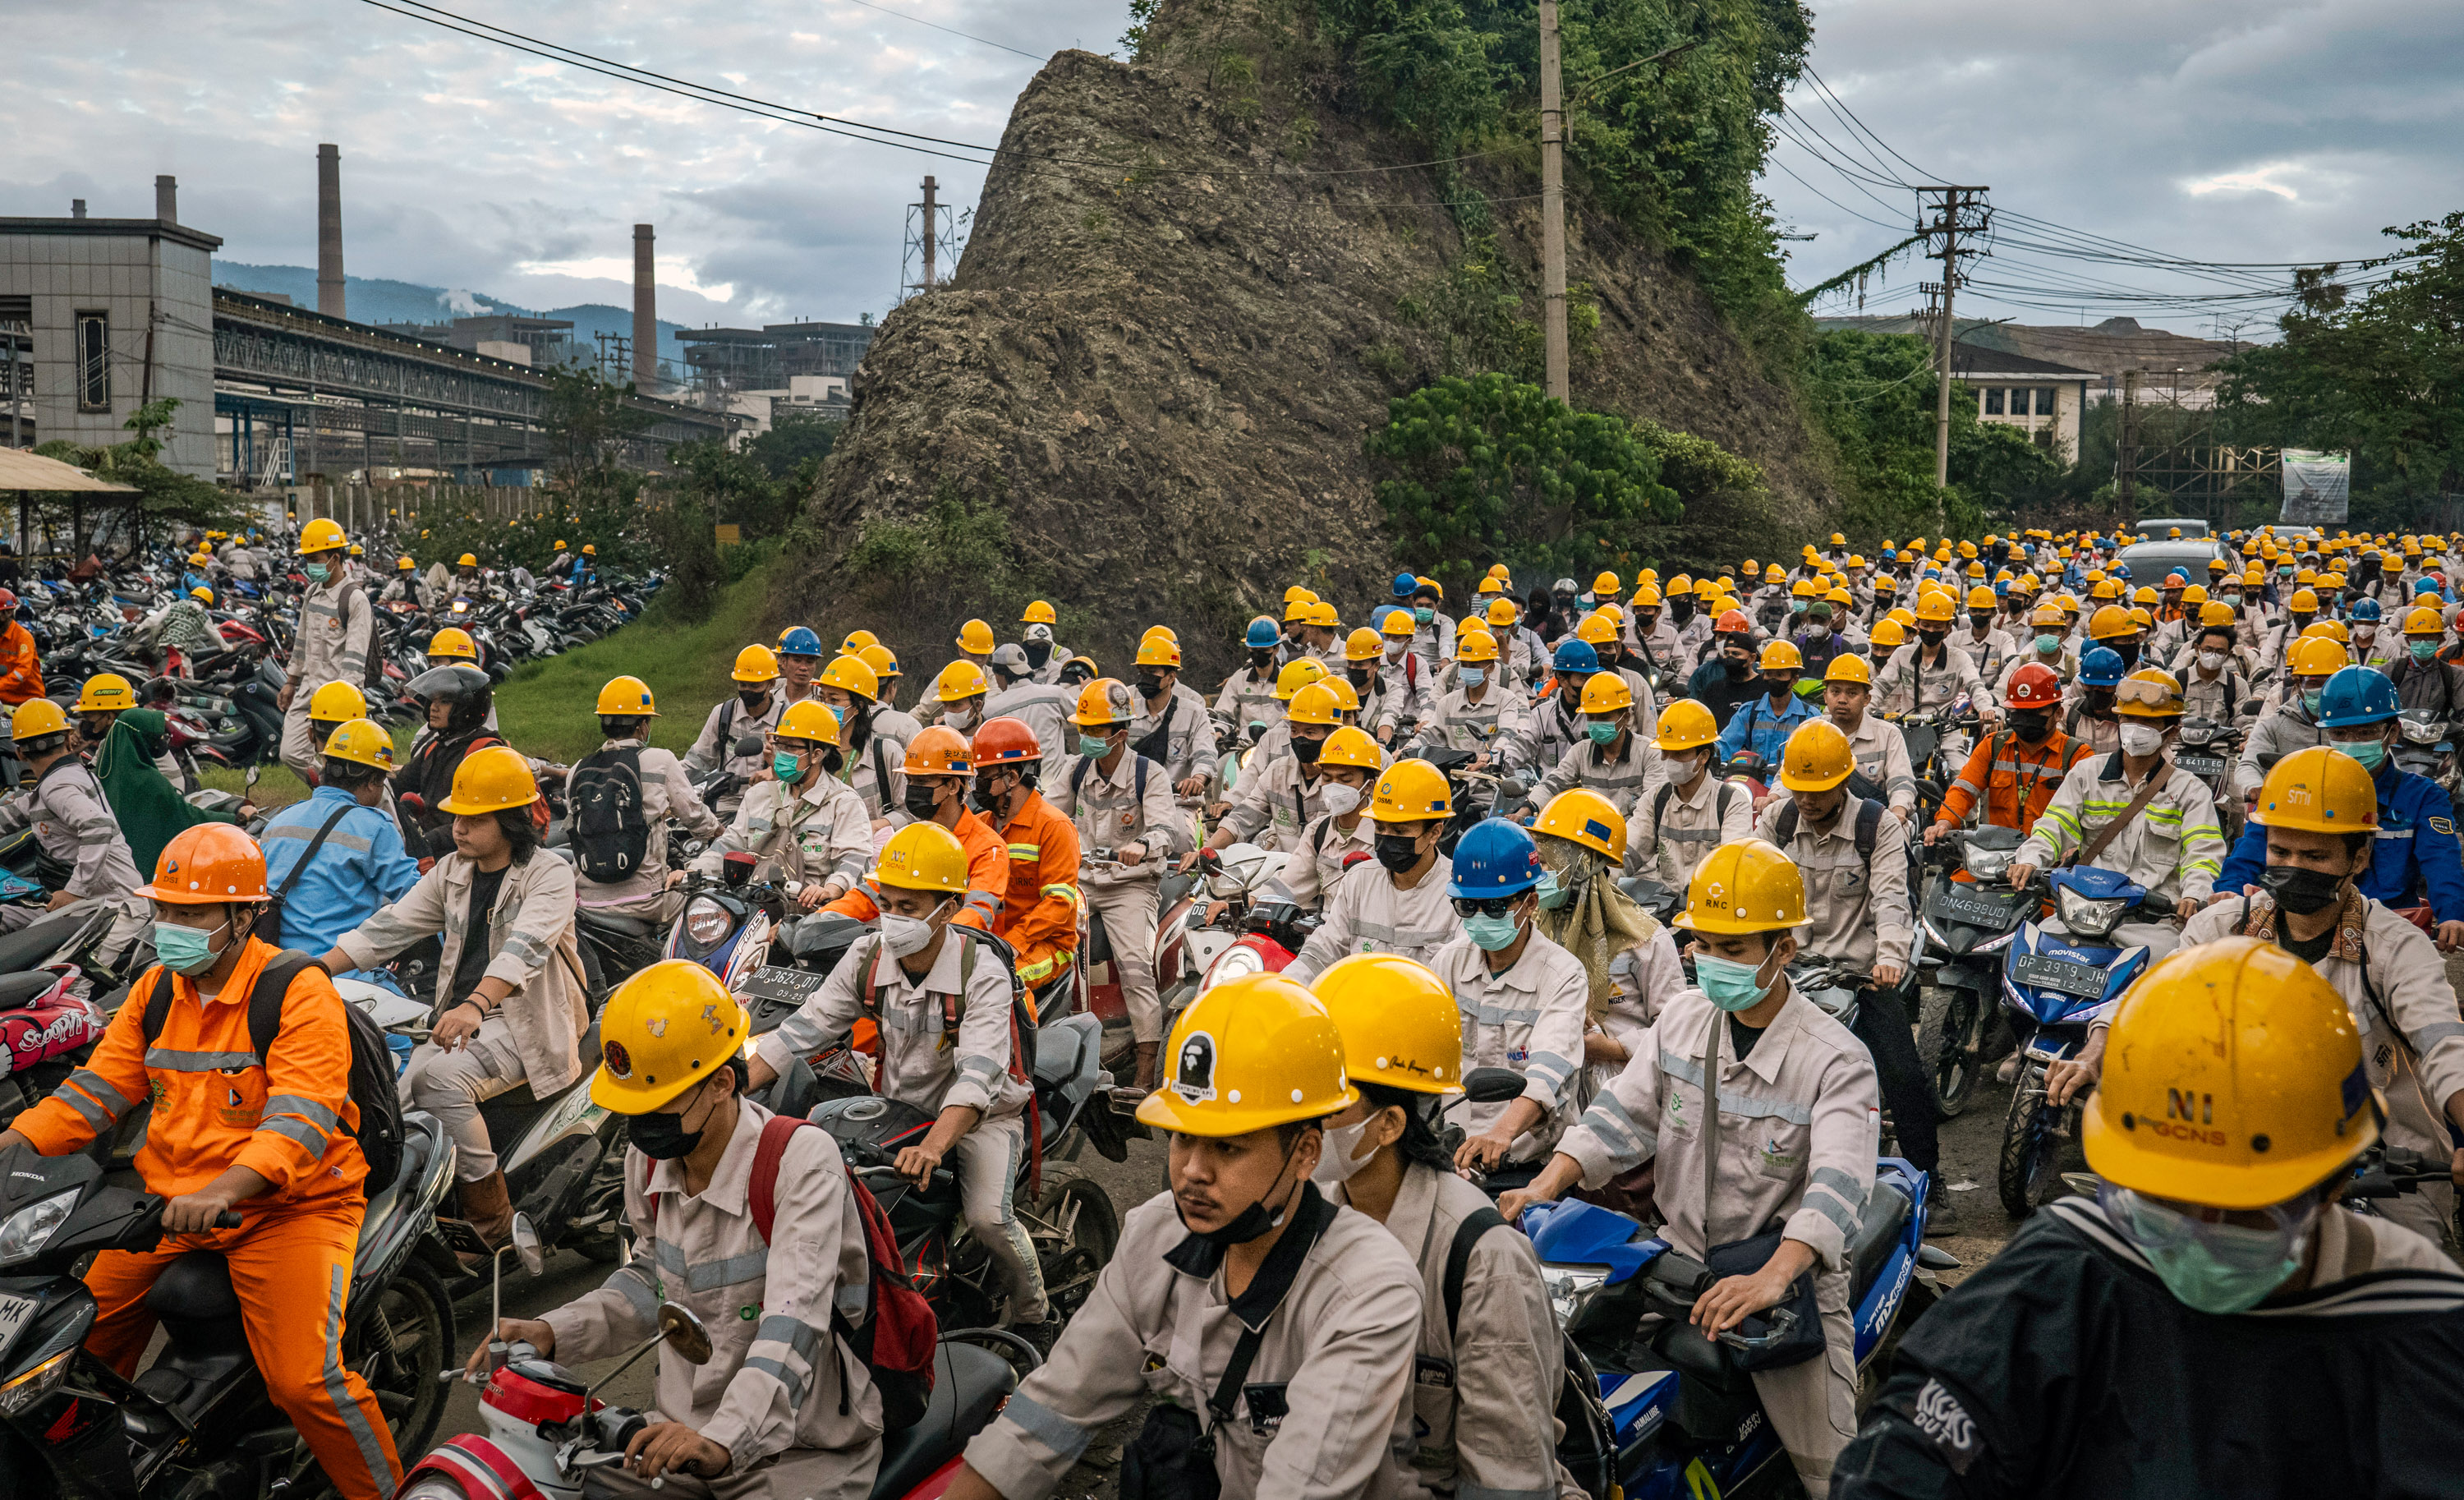 workers on motorbikes with mining helmets in a large traffic jam